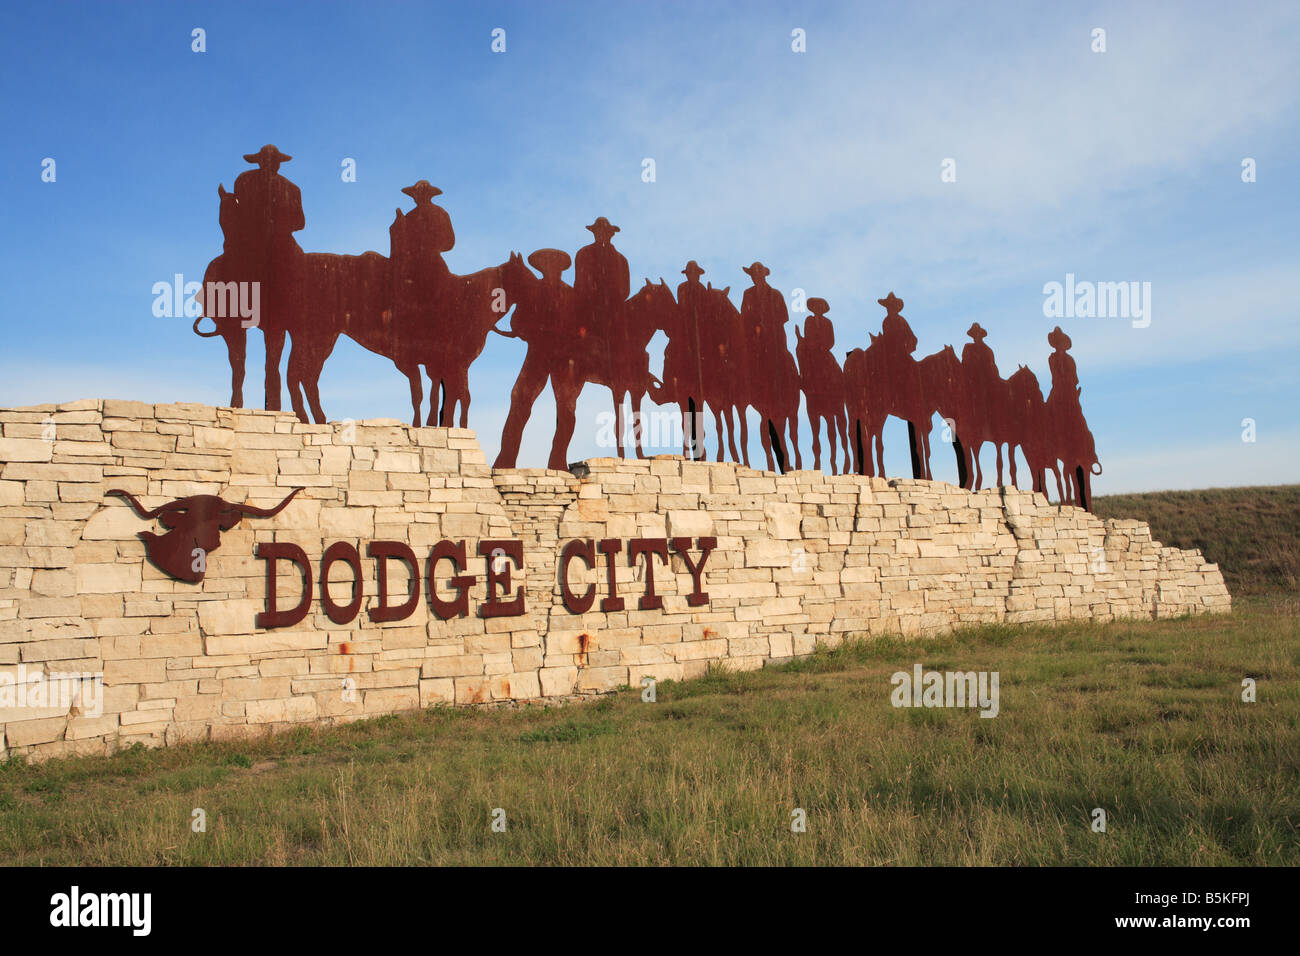 A city sign and sculpture at the entrance to Dodge City, Kansas, USA. Stock Photo